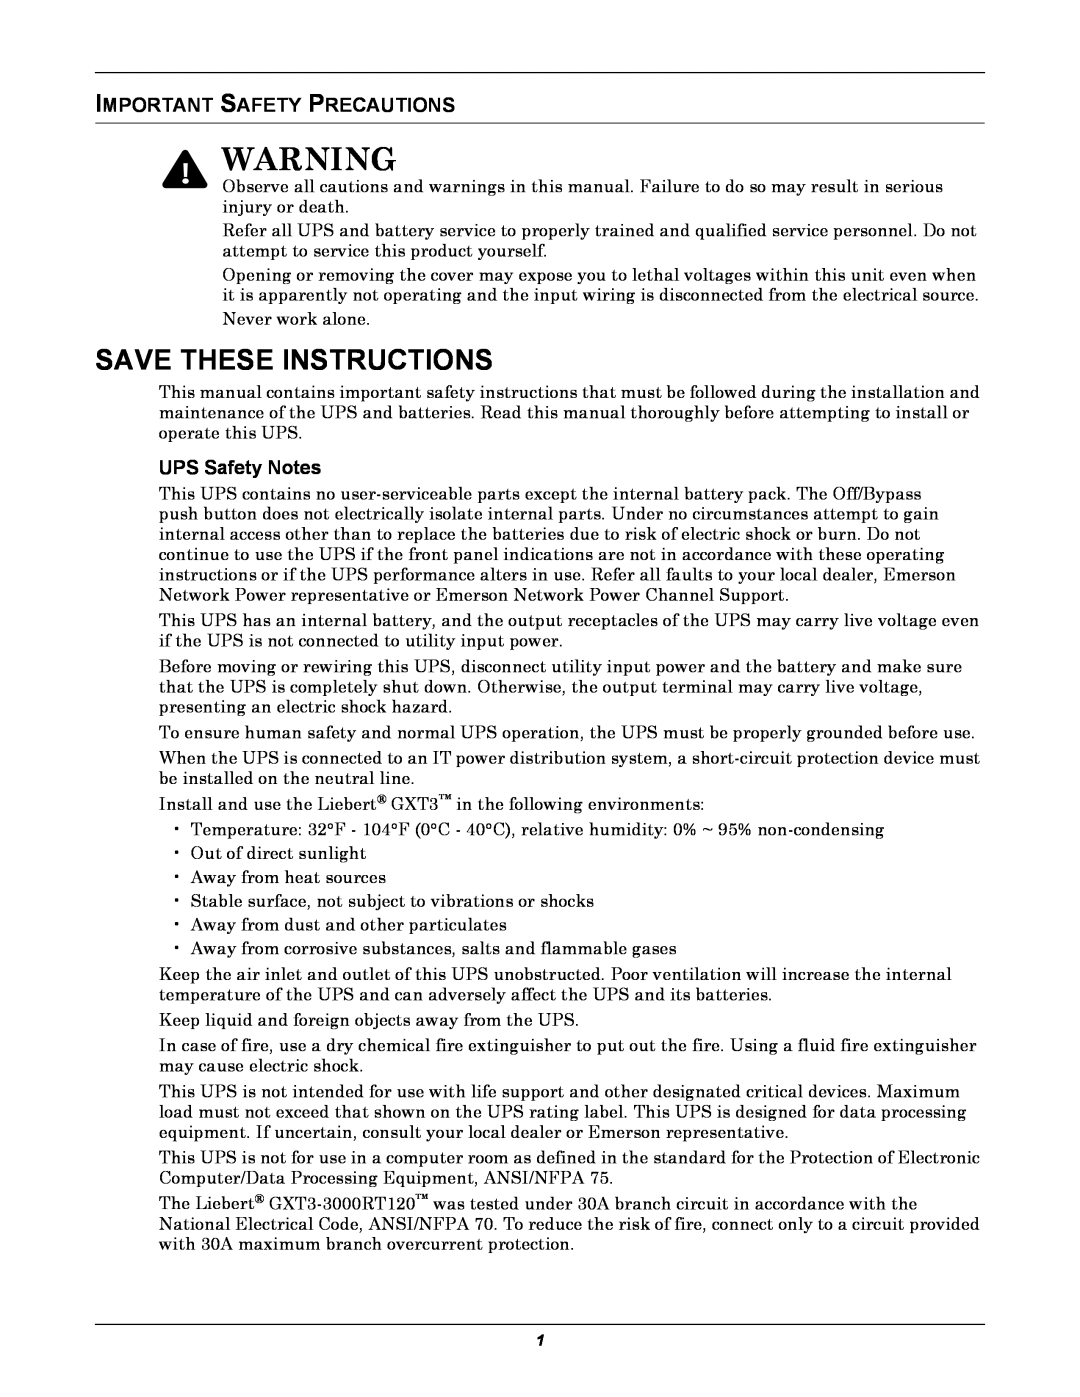 Emerson 208V, GXT3 user manual Important Safety Precautions, UPS Safety Notes, Save These Instructions 